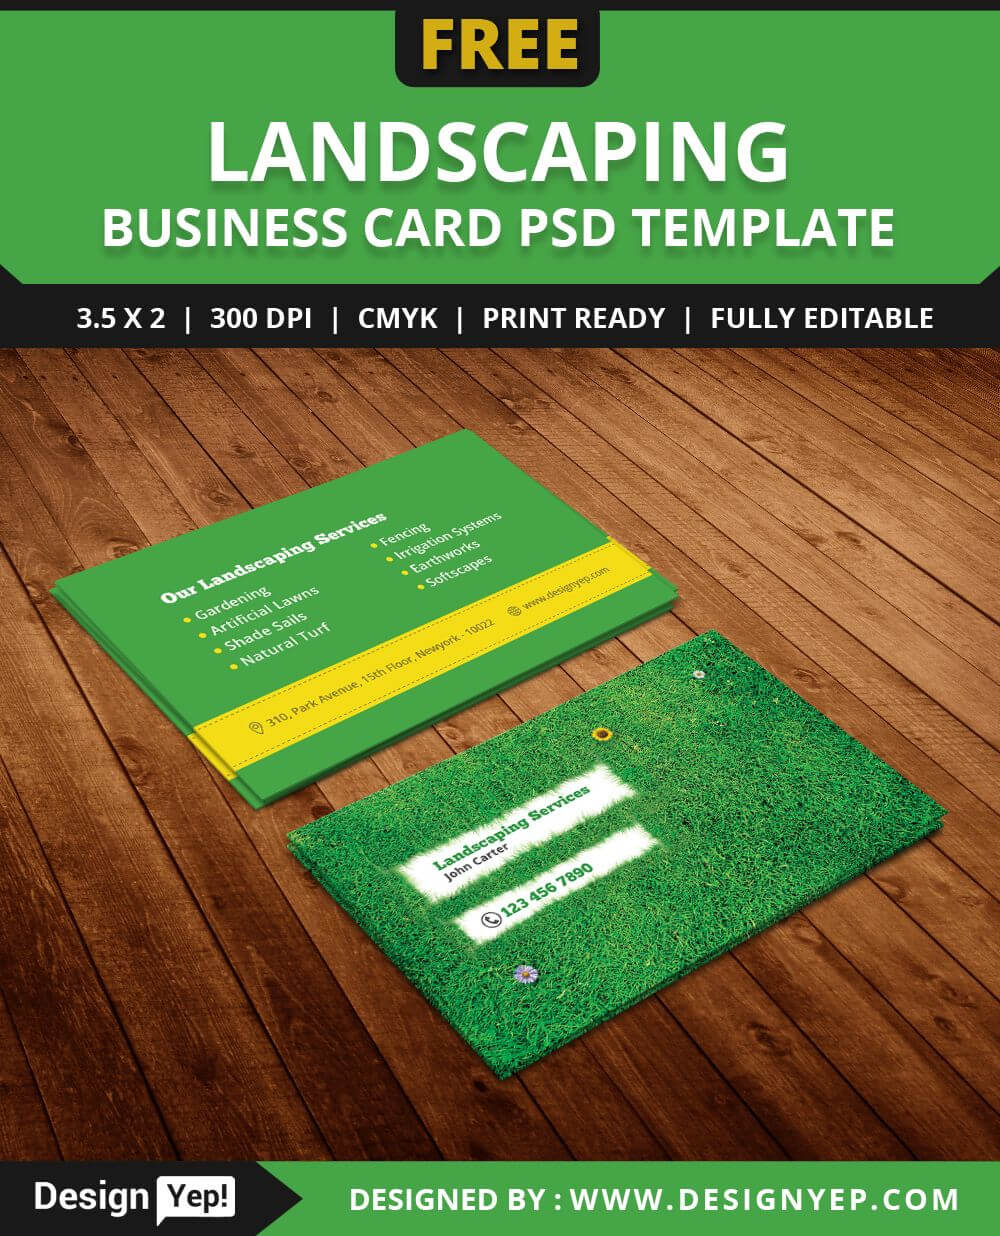 Free Landscaping Business Card Template Psd | Free Business Within Landscaping Business Card Template